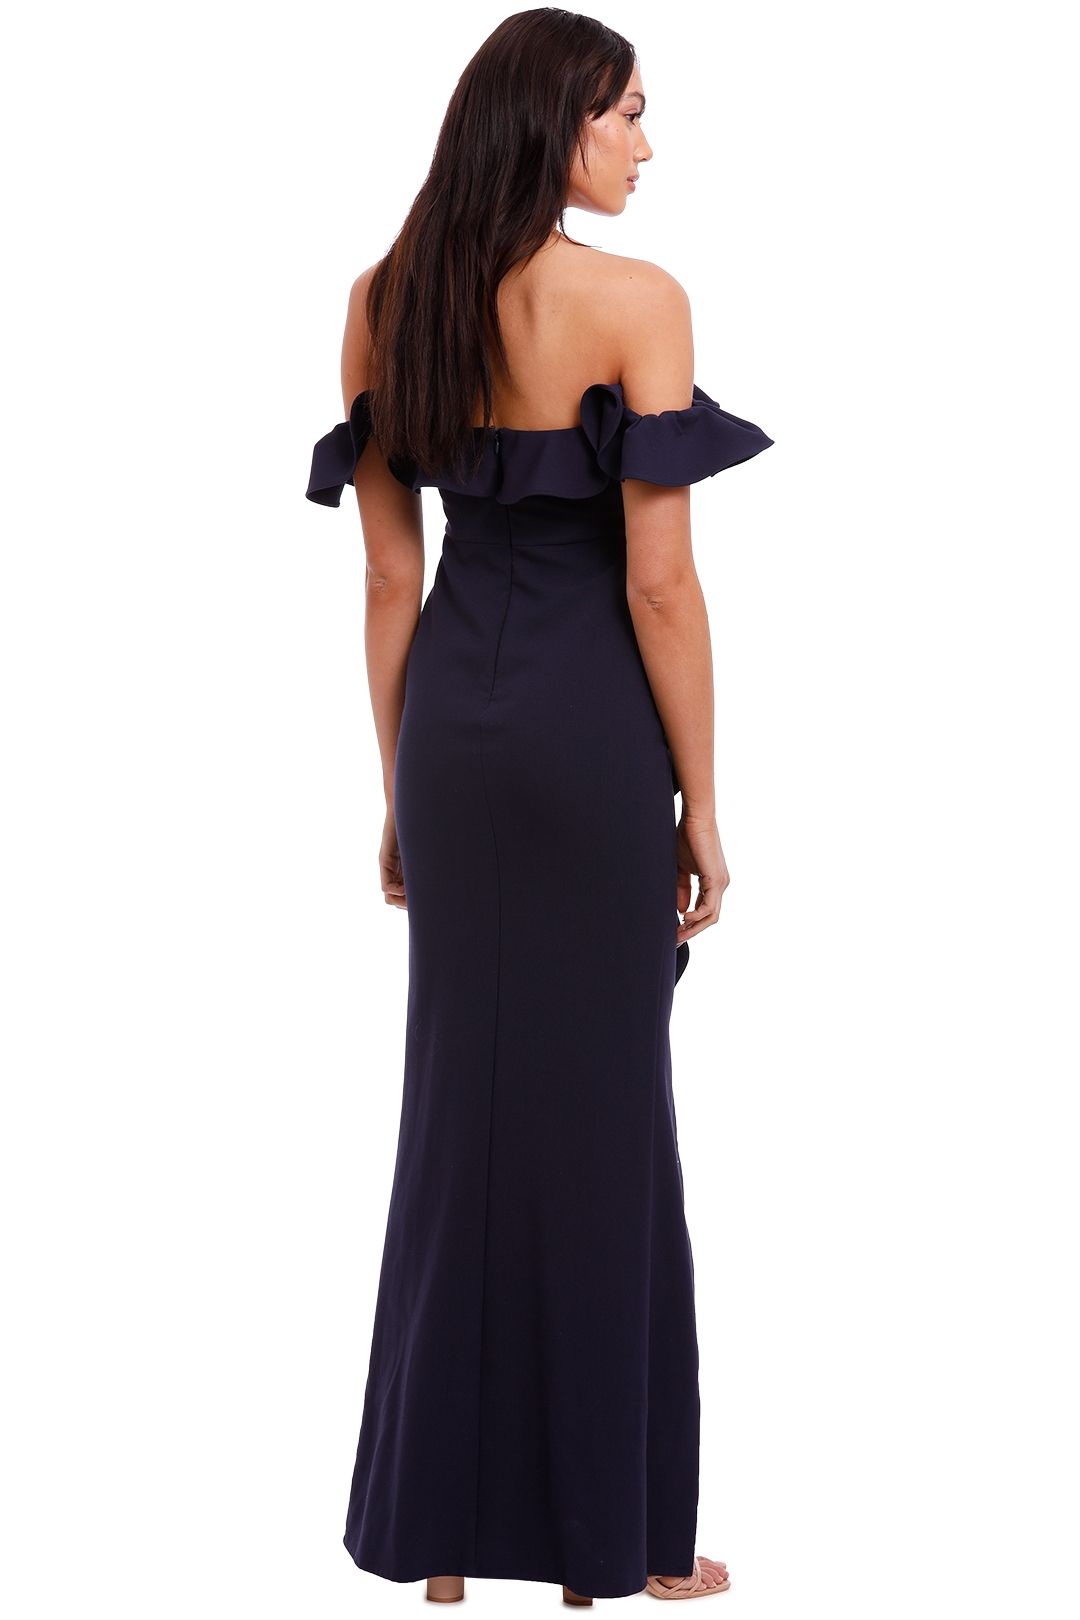 Likely NYC Miller Gown Navy Floor Length